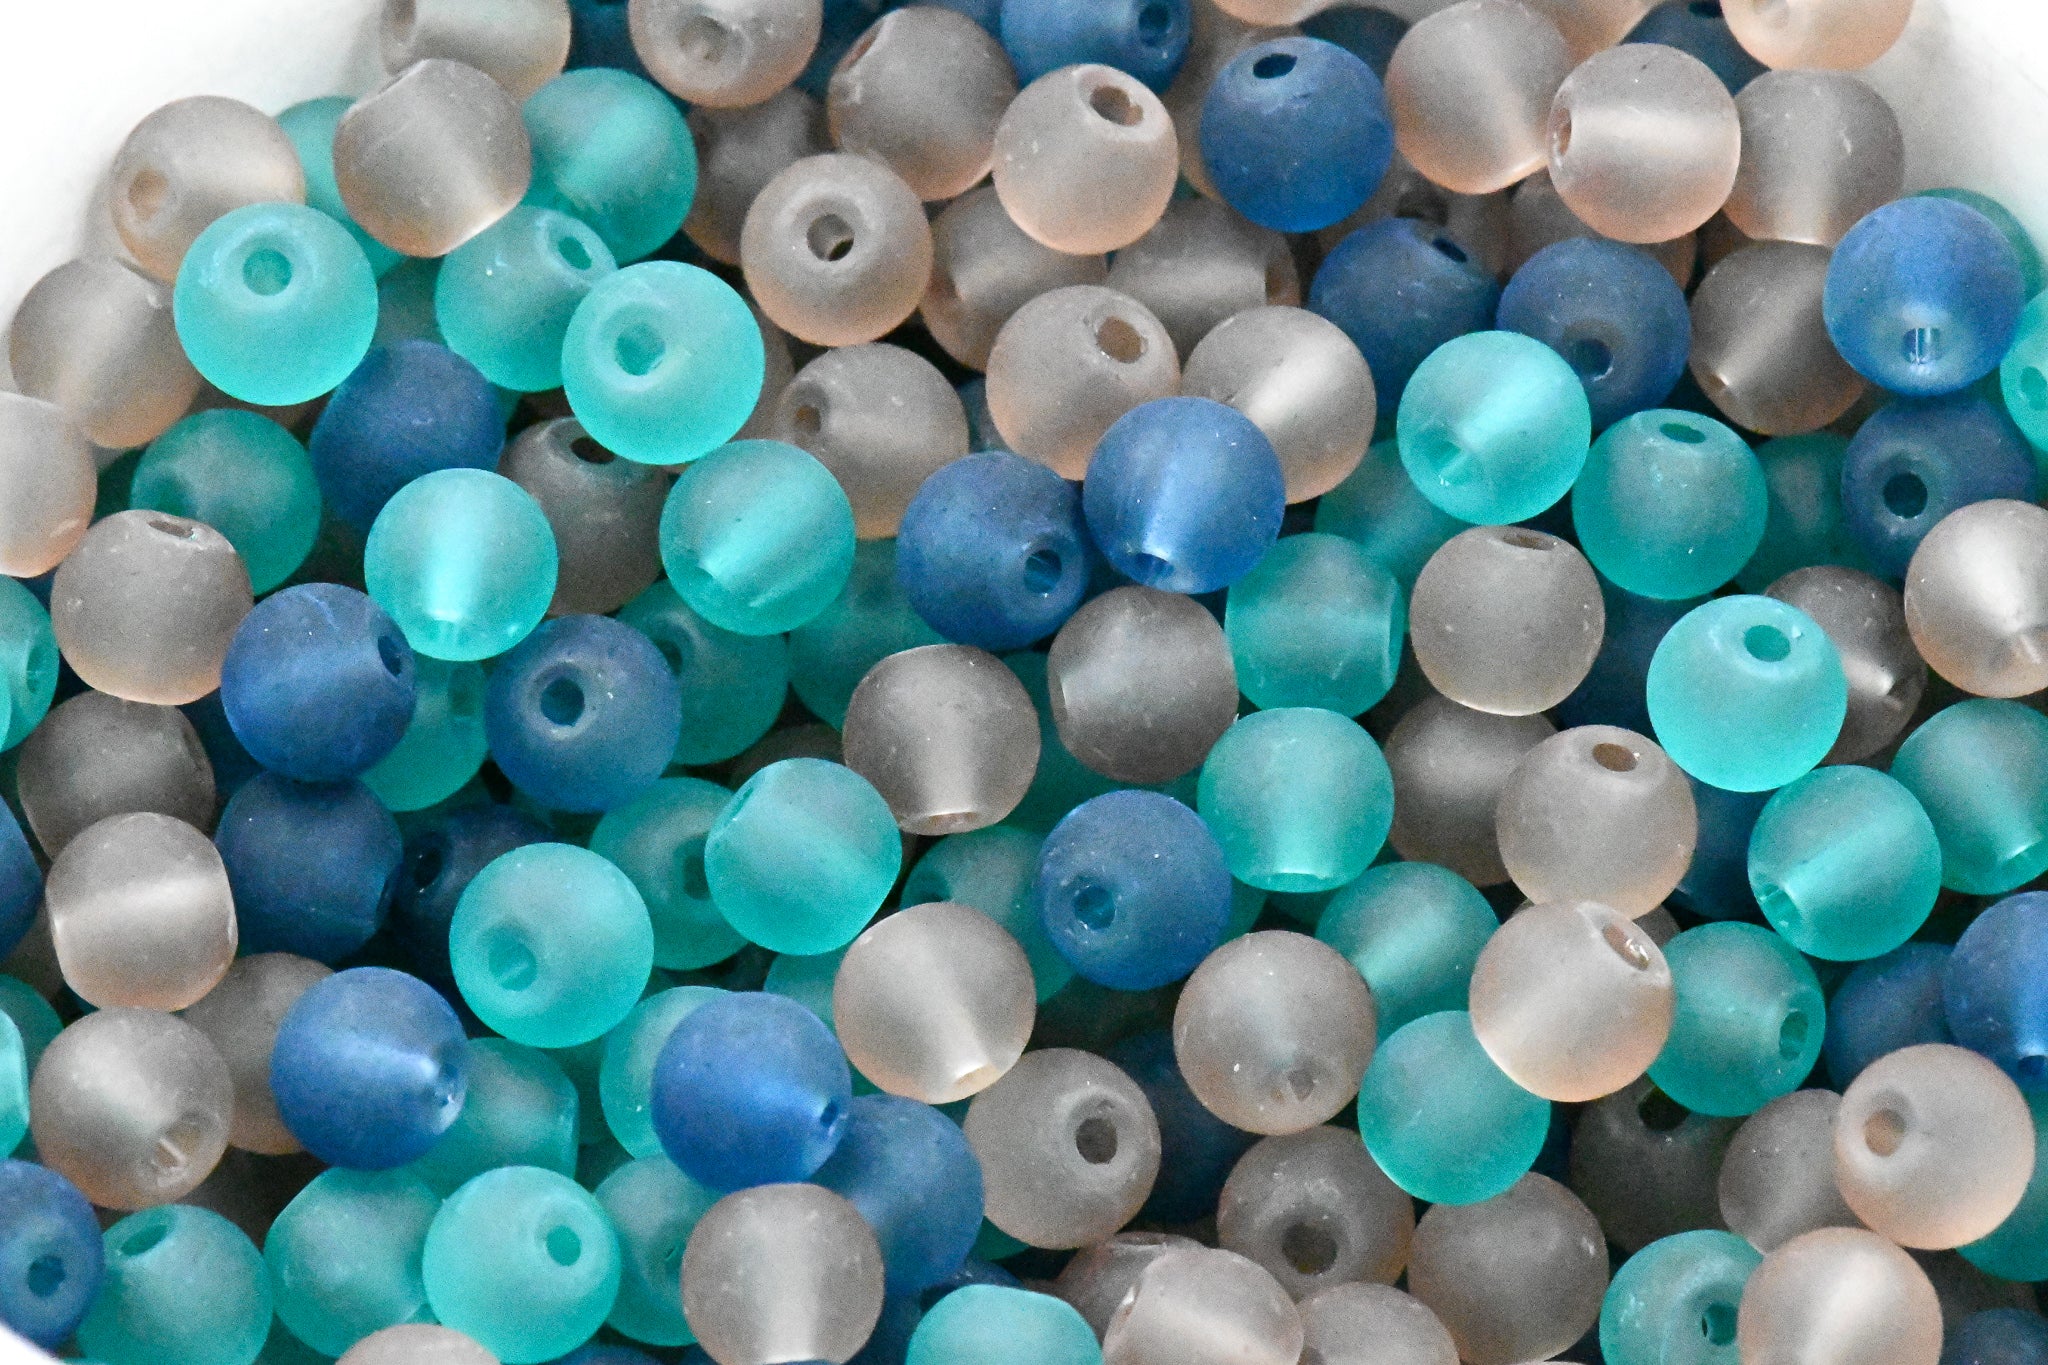 6mm Lake Blue Mix Frosted Matte Glass Round Druk Cultured Sea Glass Beads - 100 beads